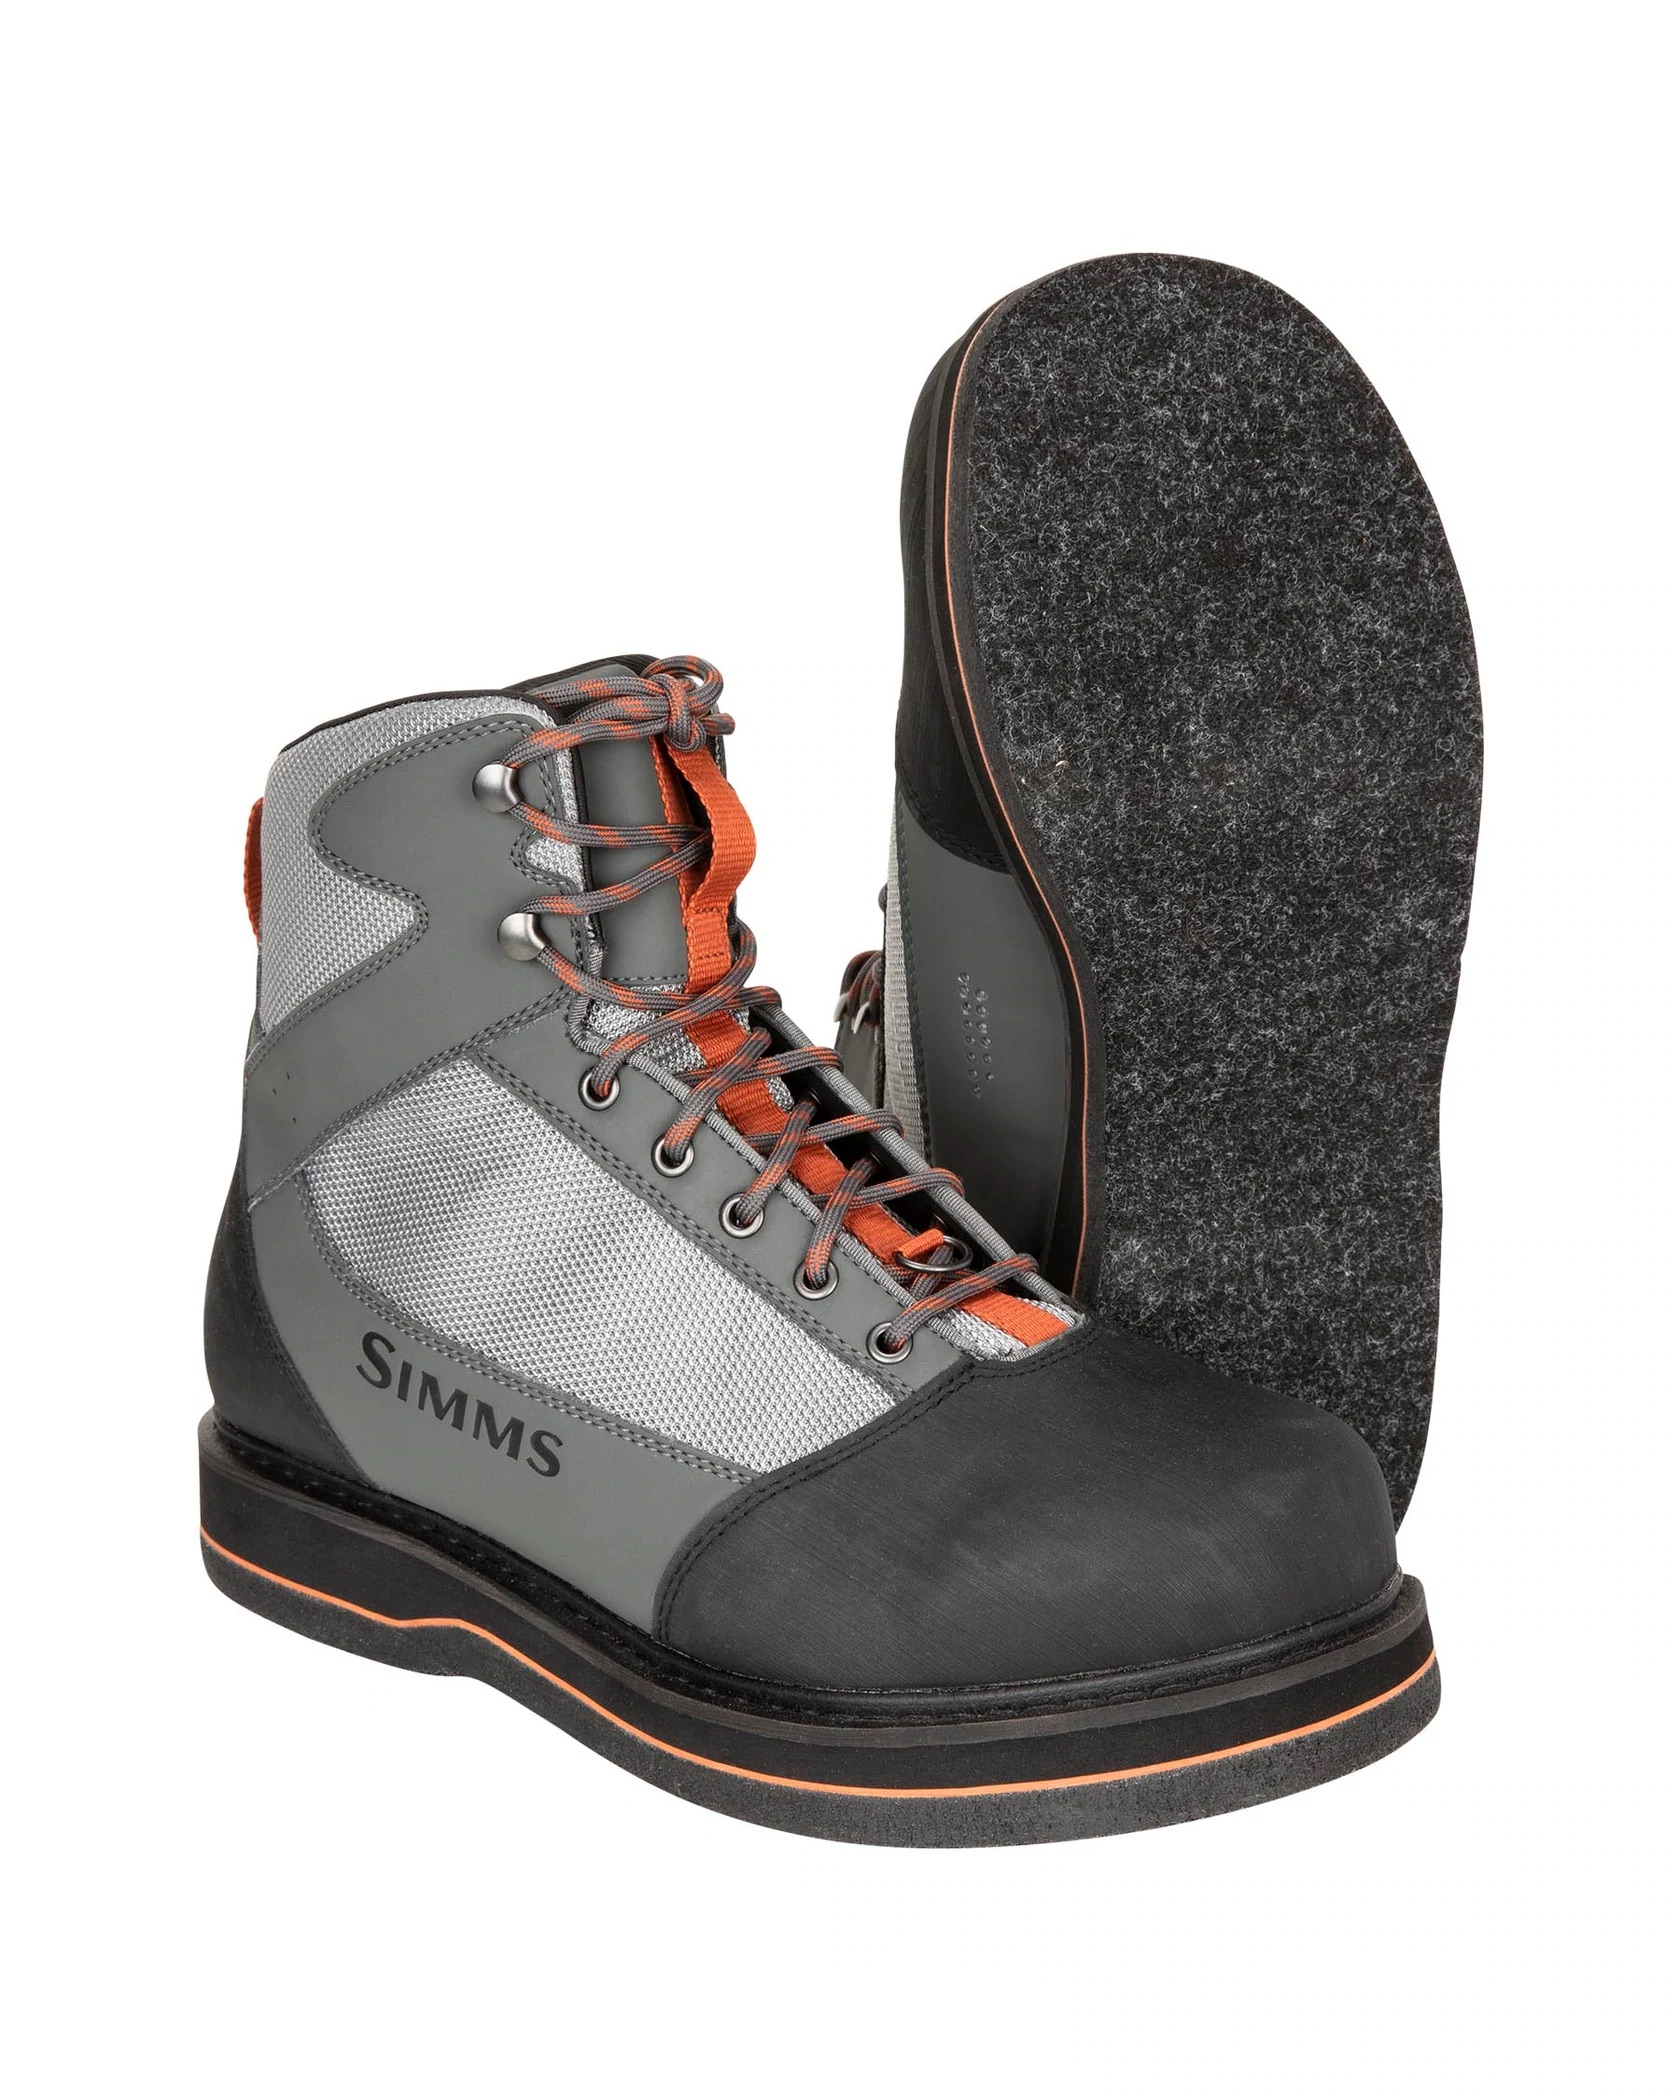 Simms Tributary Boot - Felt - Size 12